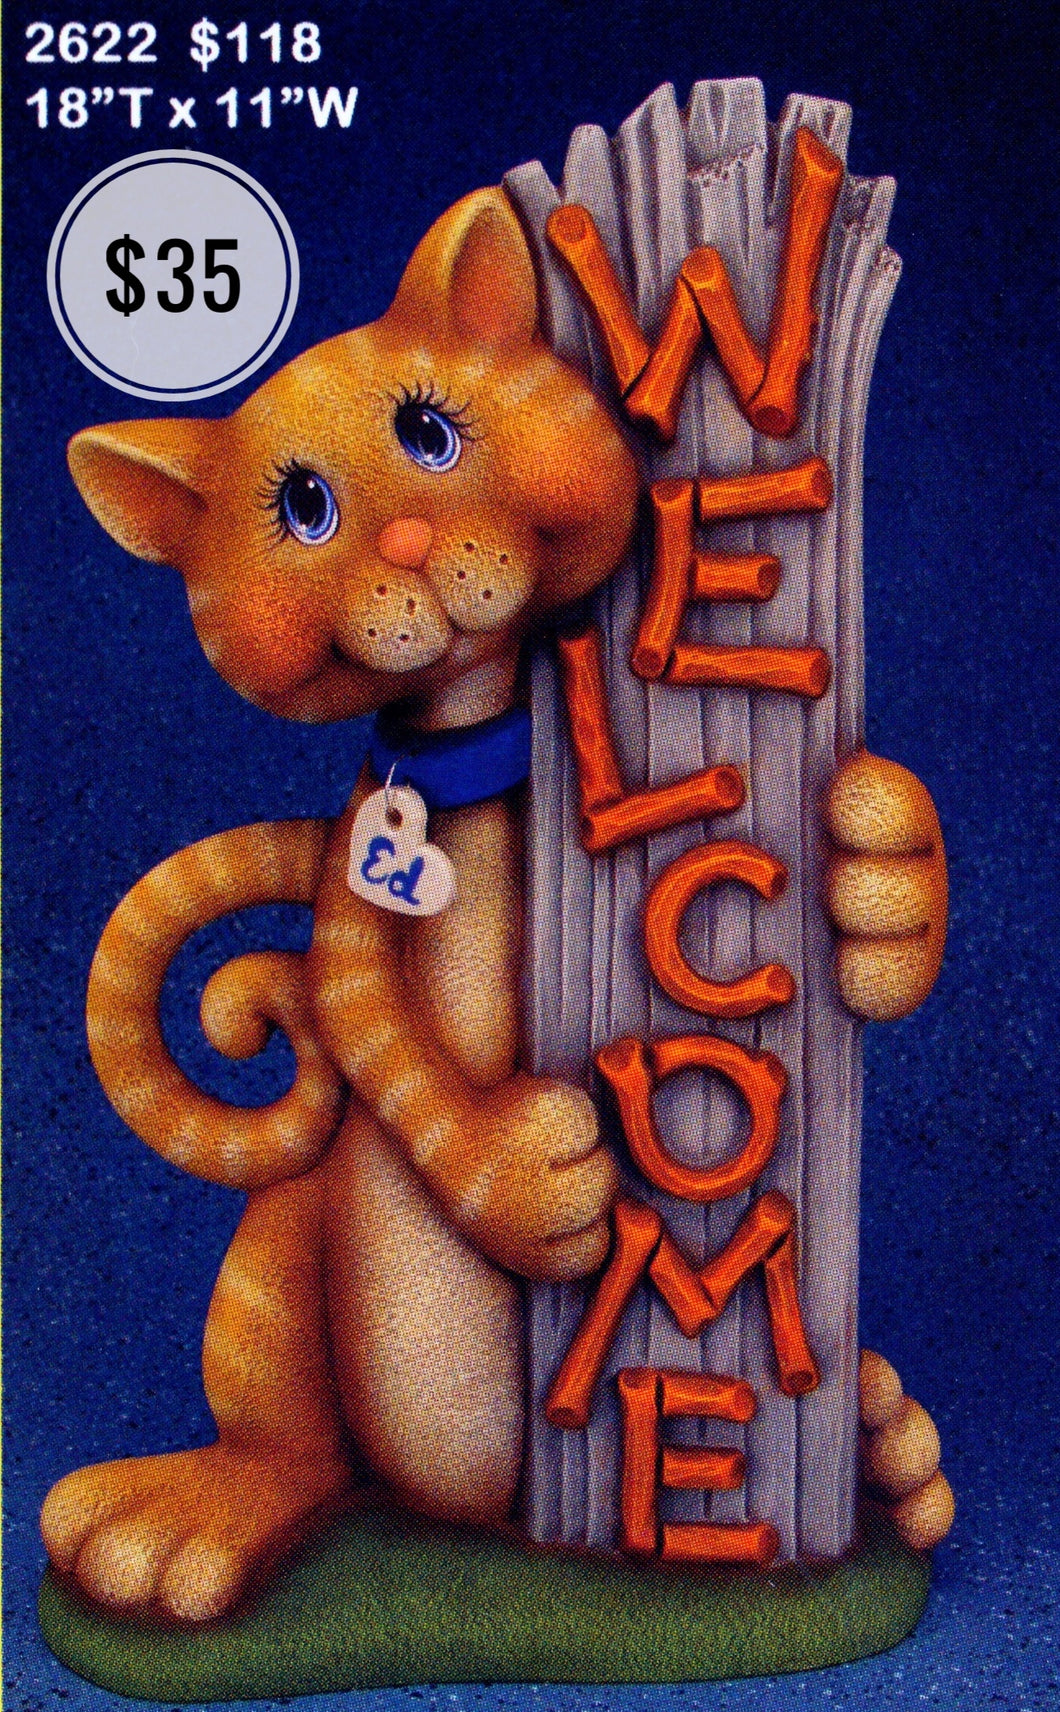 Cat Welcome Sign